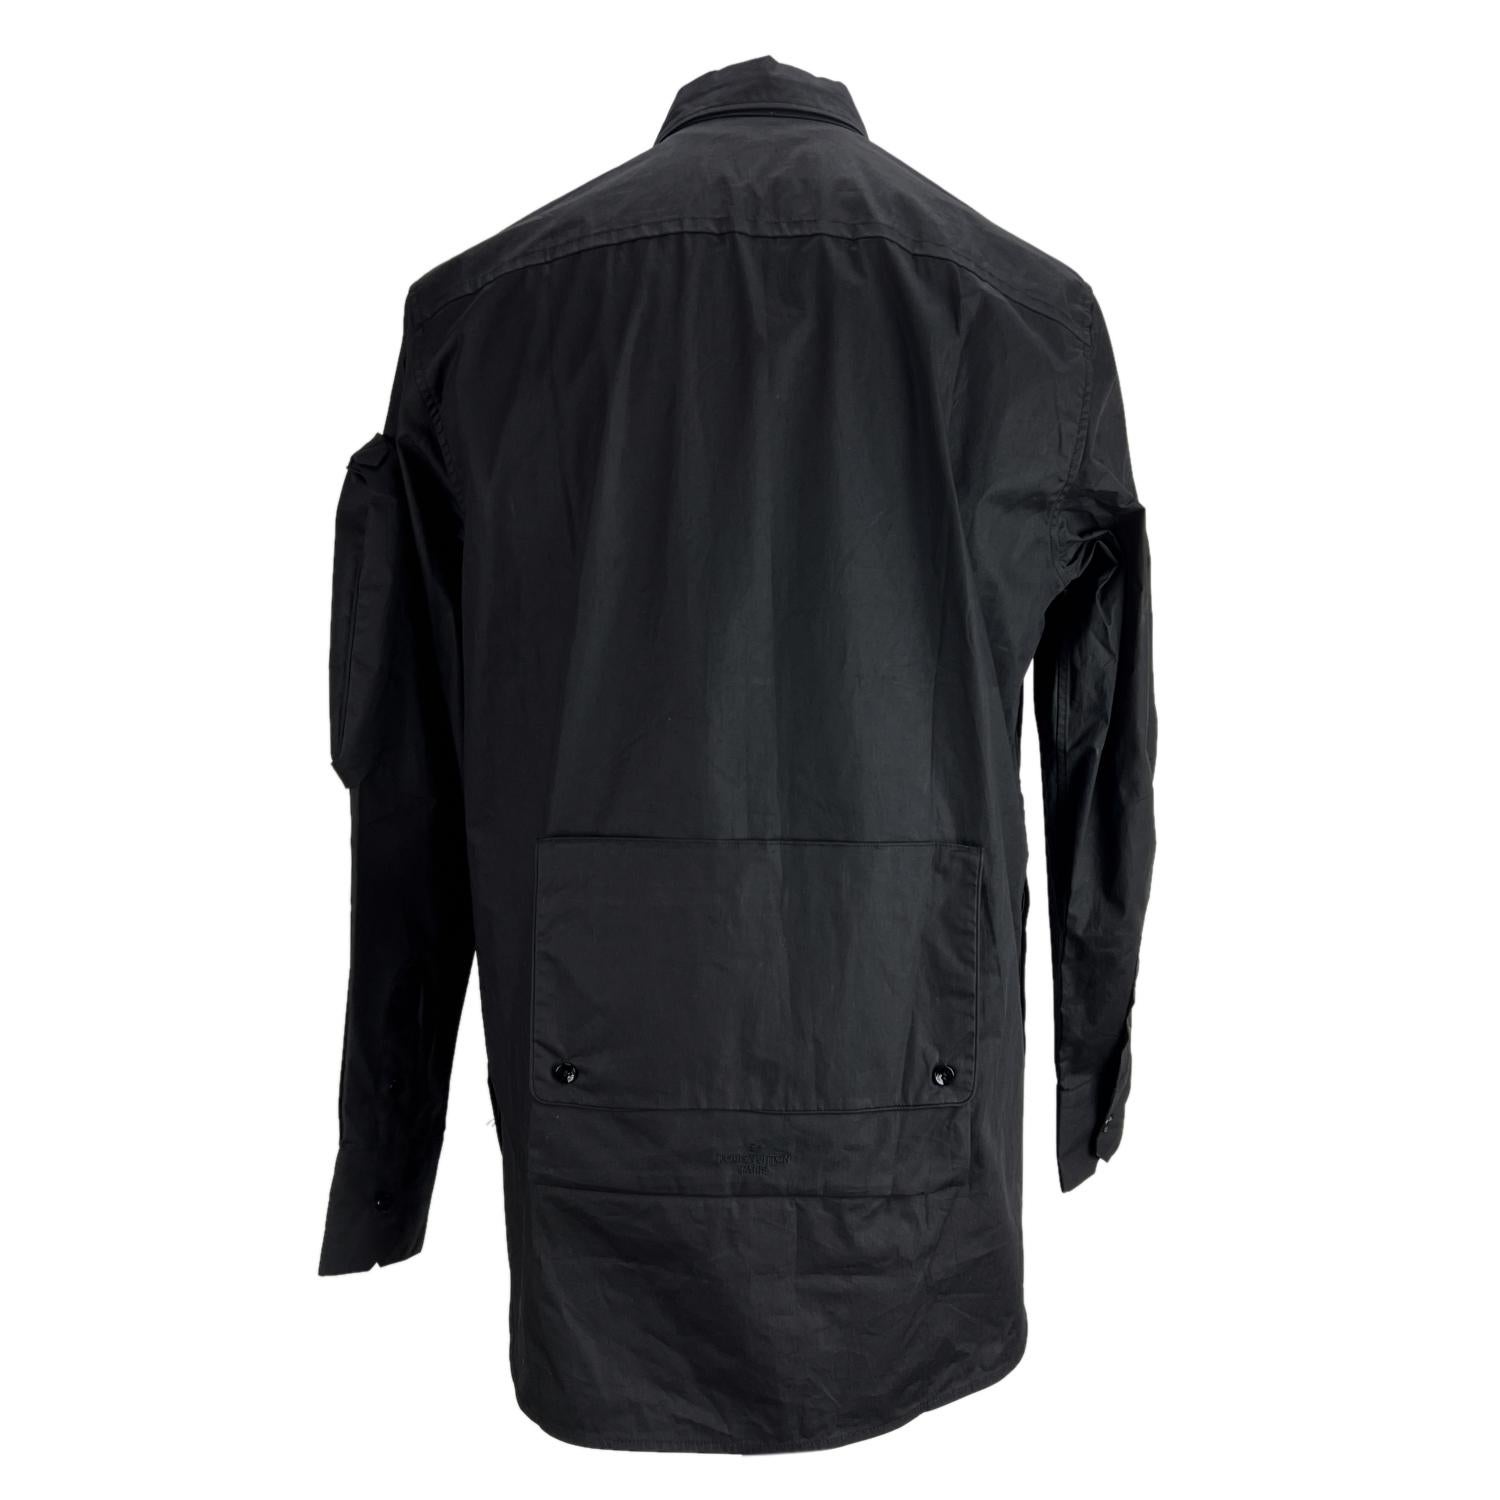 Louis Vuitton black 'Plain Rainbow' men's shirt. Coated cotton. Relaxed fit. Button closure on the front. It features applied pockets on the sleeve and back. Collared neckline. Long sleeve with buttoned cuffs. Embroidered Louis Vuitton signature.